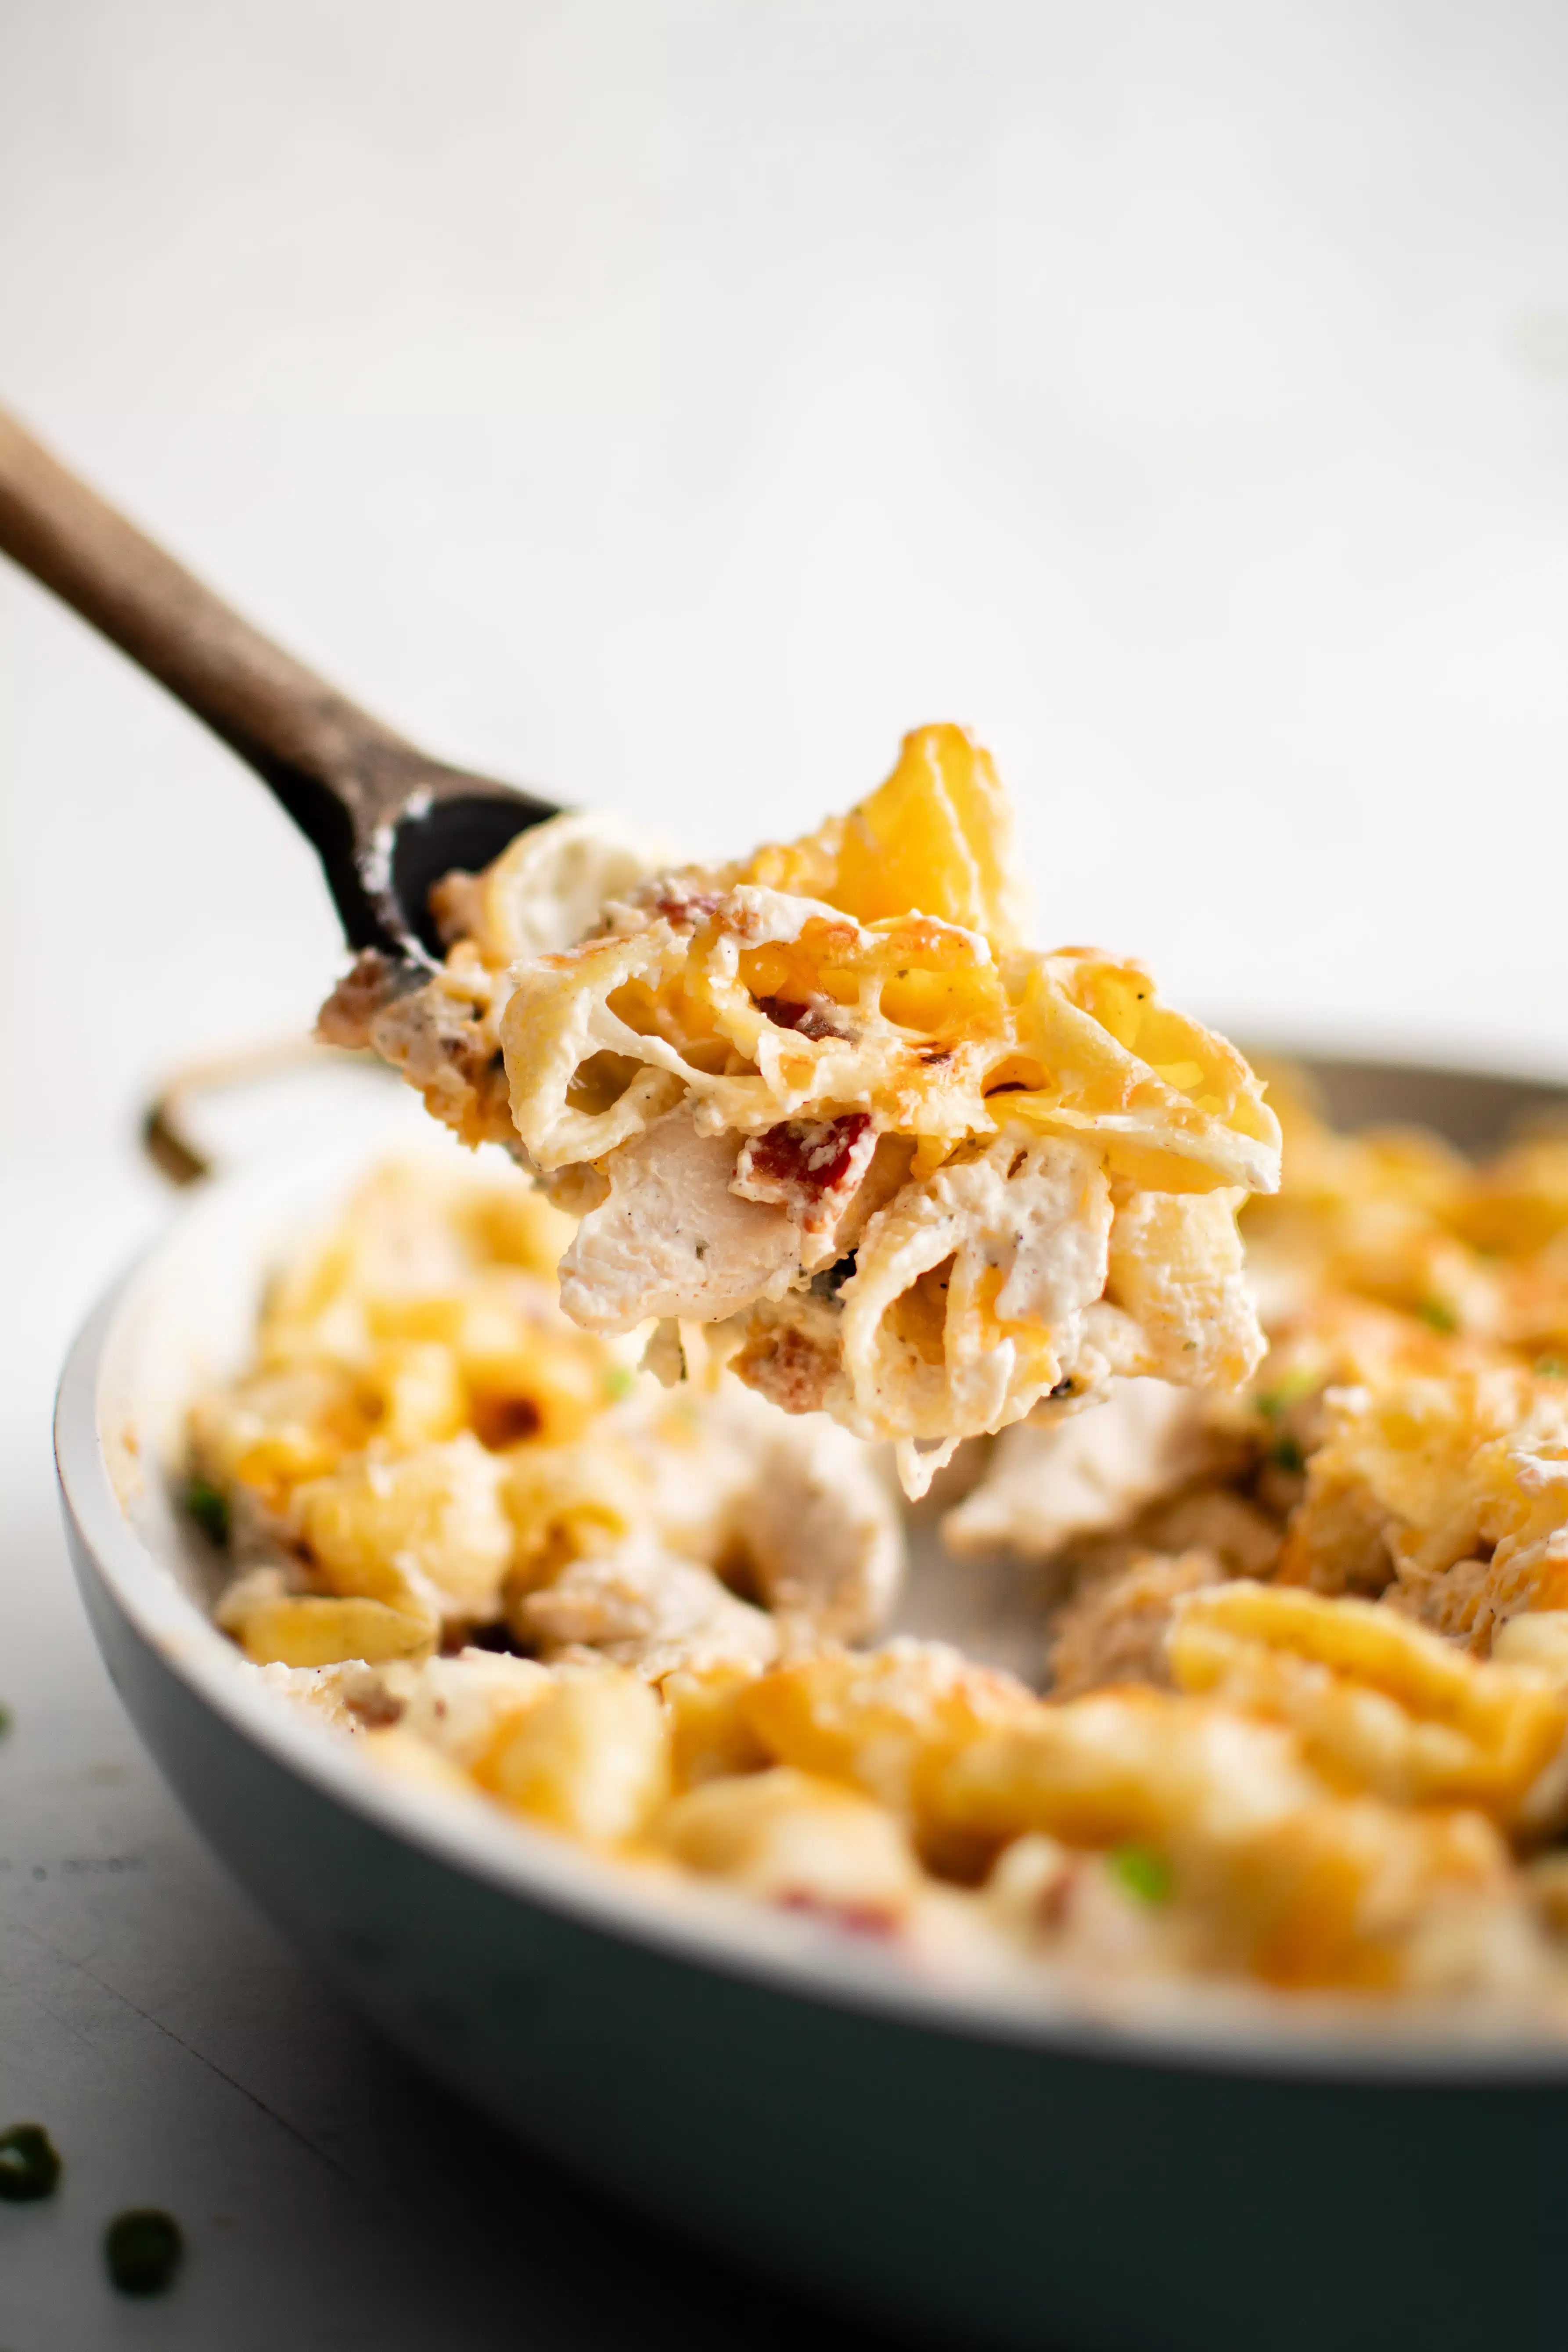 Large wooden spoon filled with crack chicken casserole made with cheese and noodles.